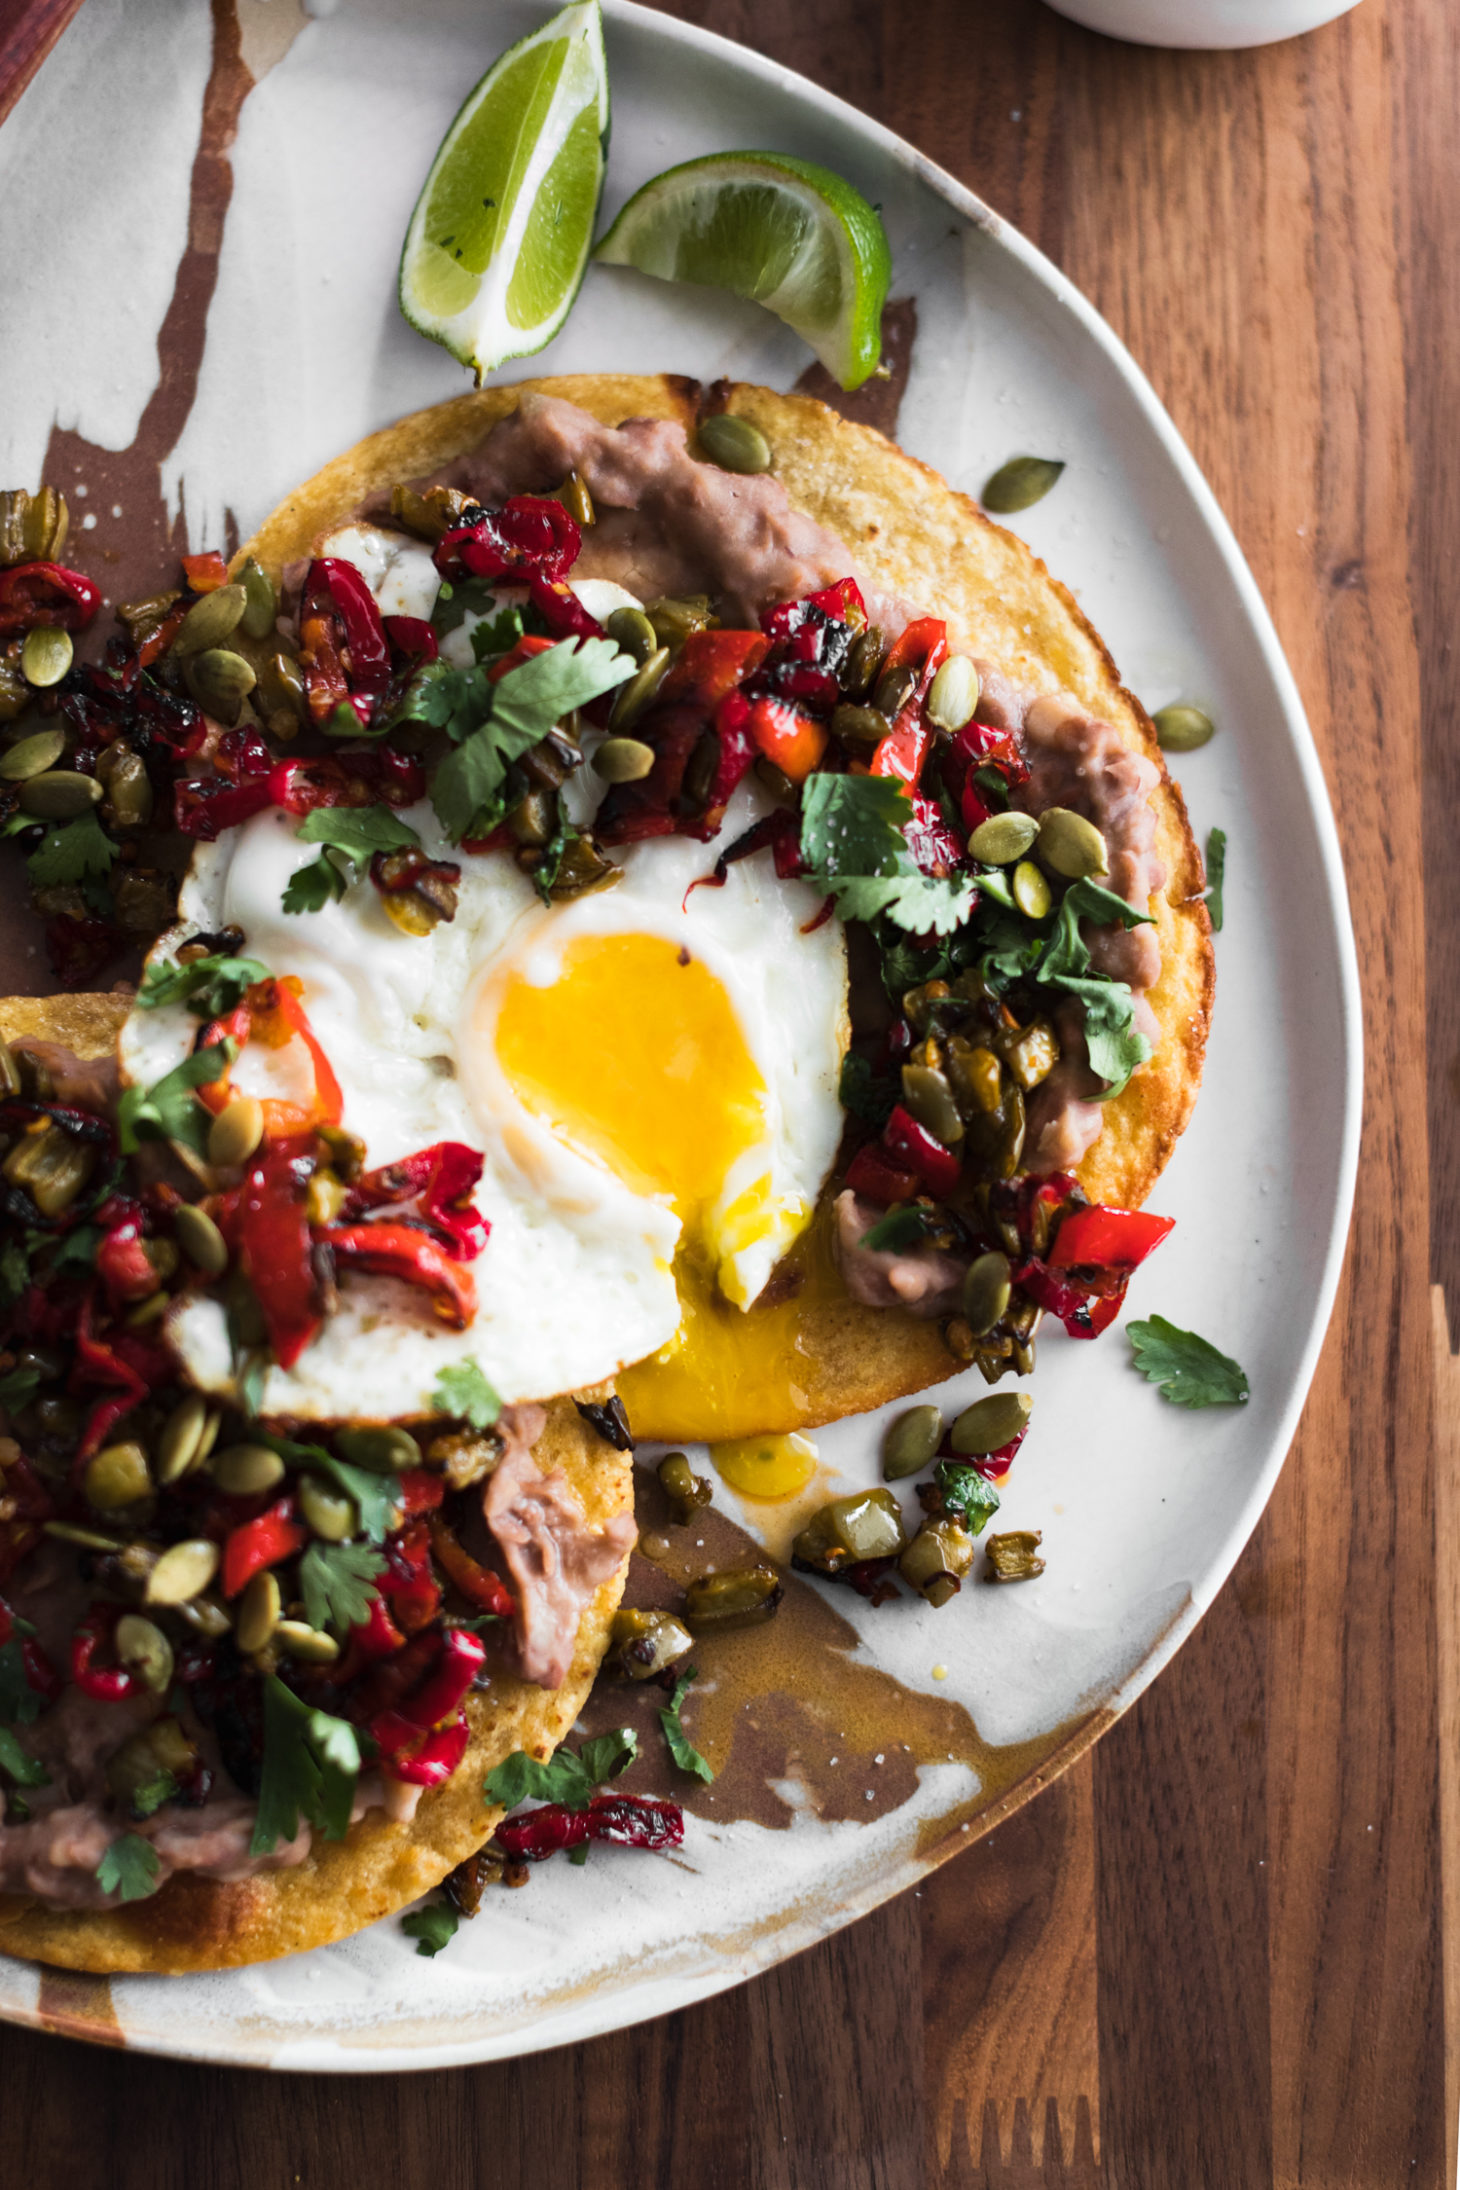 Pinto Bean Tostadas with Nopales and Eggs